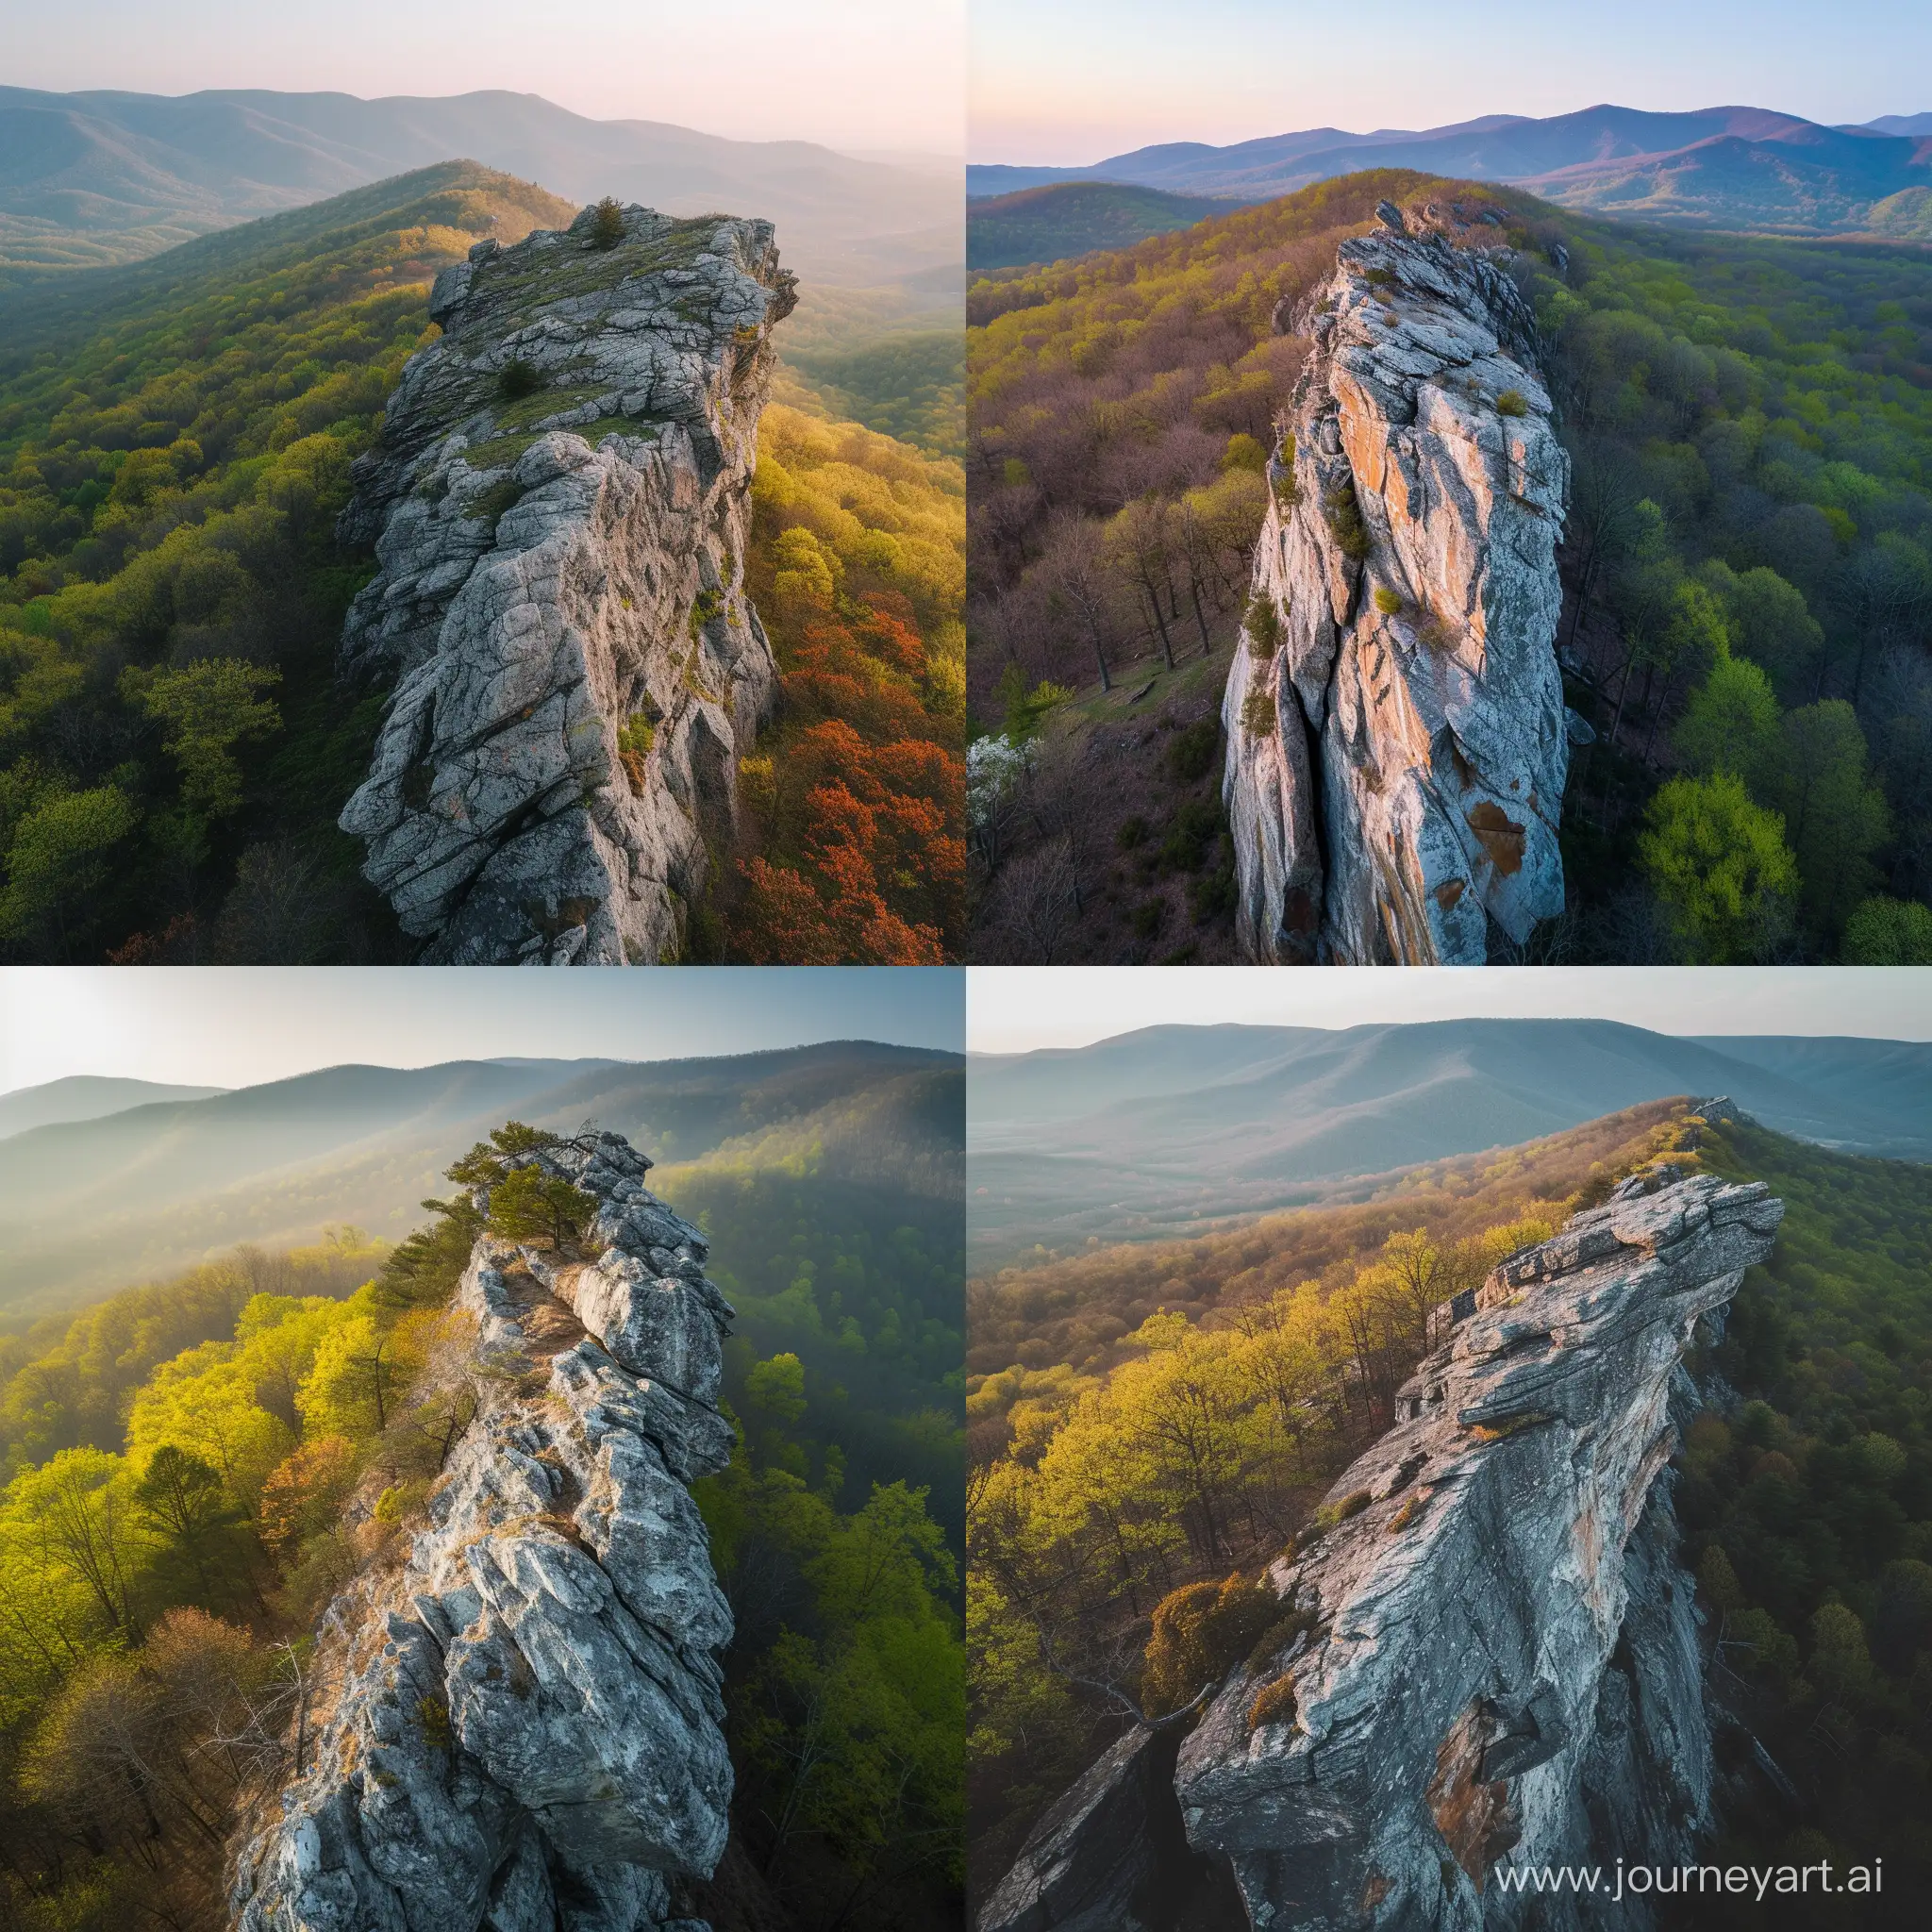 photo of humpback rock outcrop, virginia, blue ridge mountains, drone photography looking at the outcrop, spring foliage, early morning